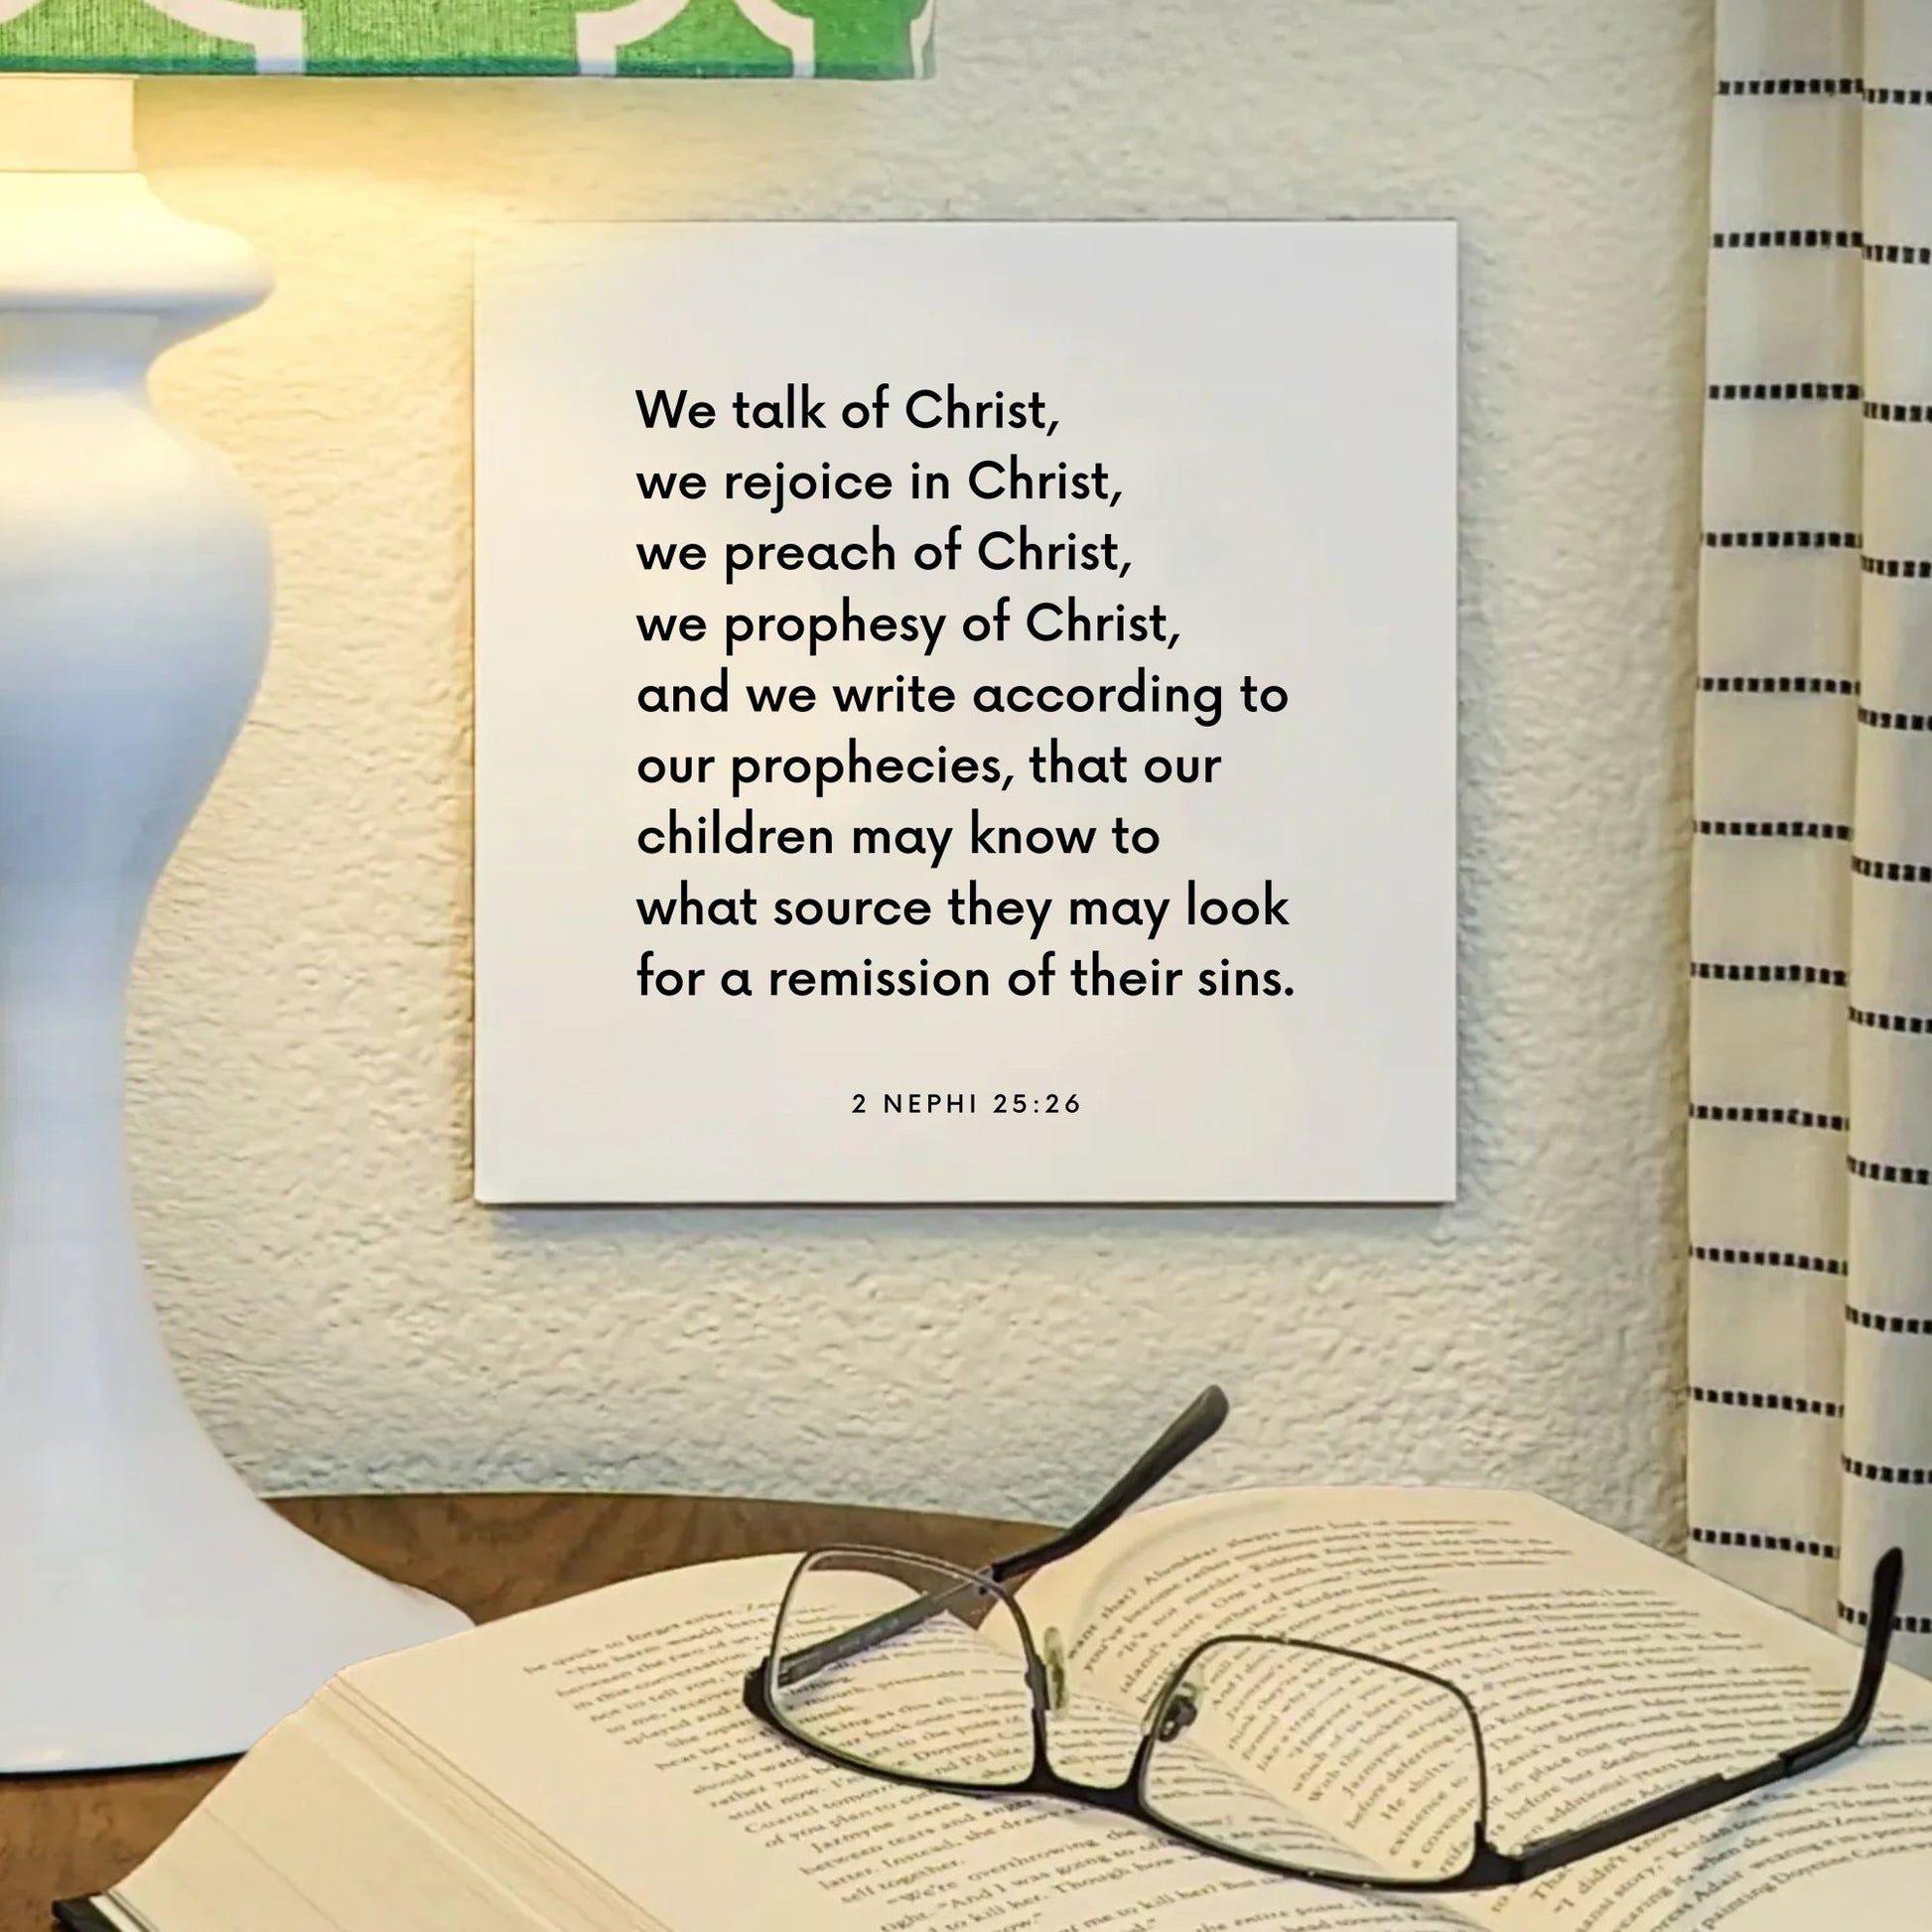 Lamp mouting of the scripture tile for 2 Nephi 25:26 - "We talk of Christ, we rejoice in Christ"